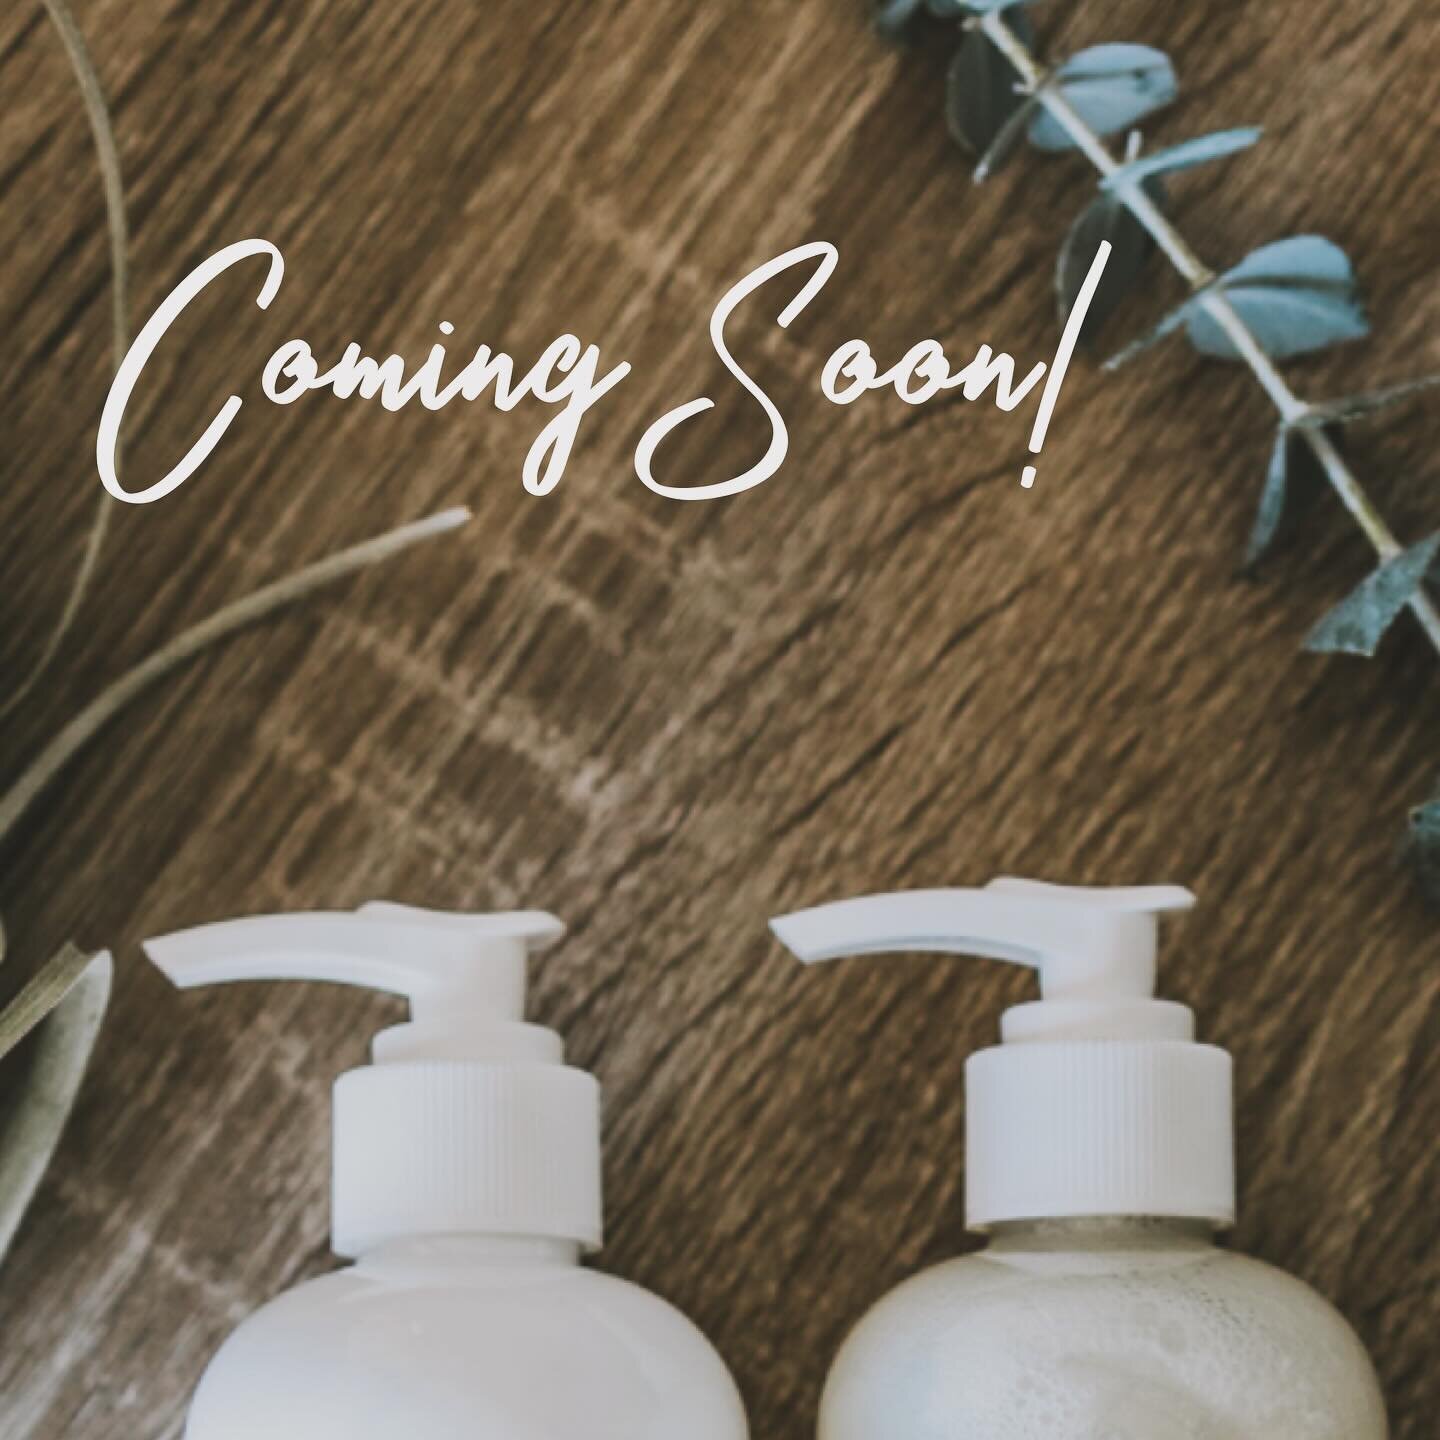 So excited to announce a new version of shampoo and conditioner is being added to the ONLY family!! The drop happens next week, so stay tuned!